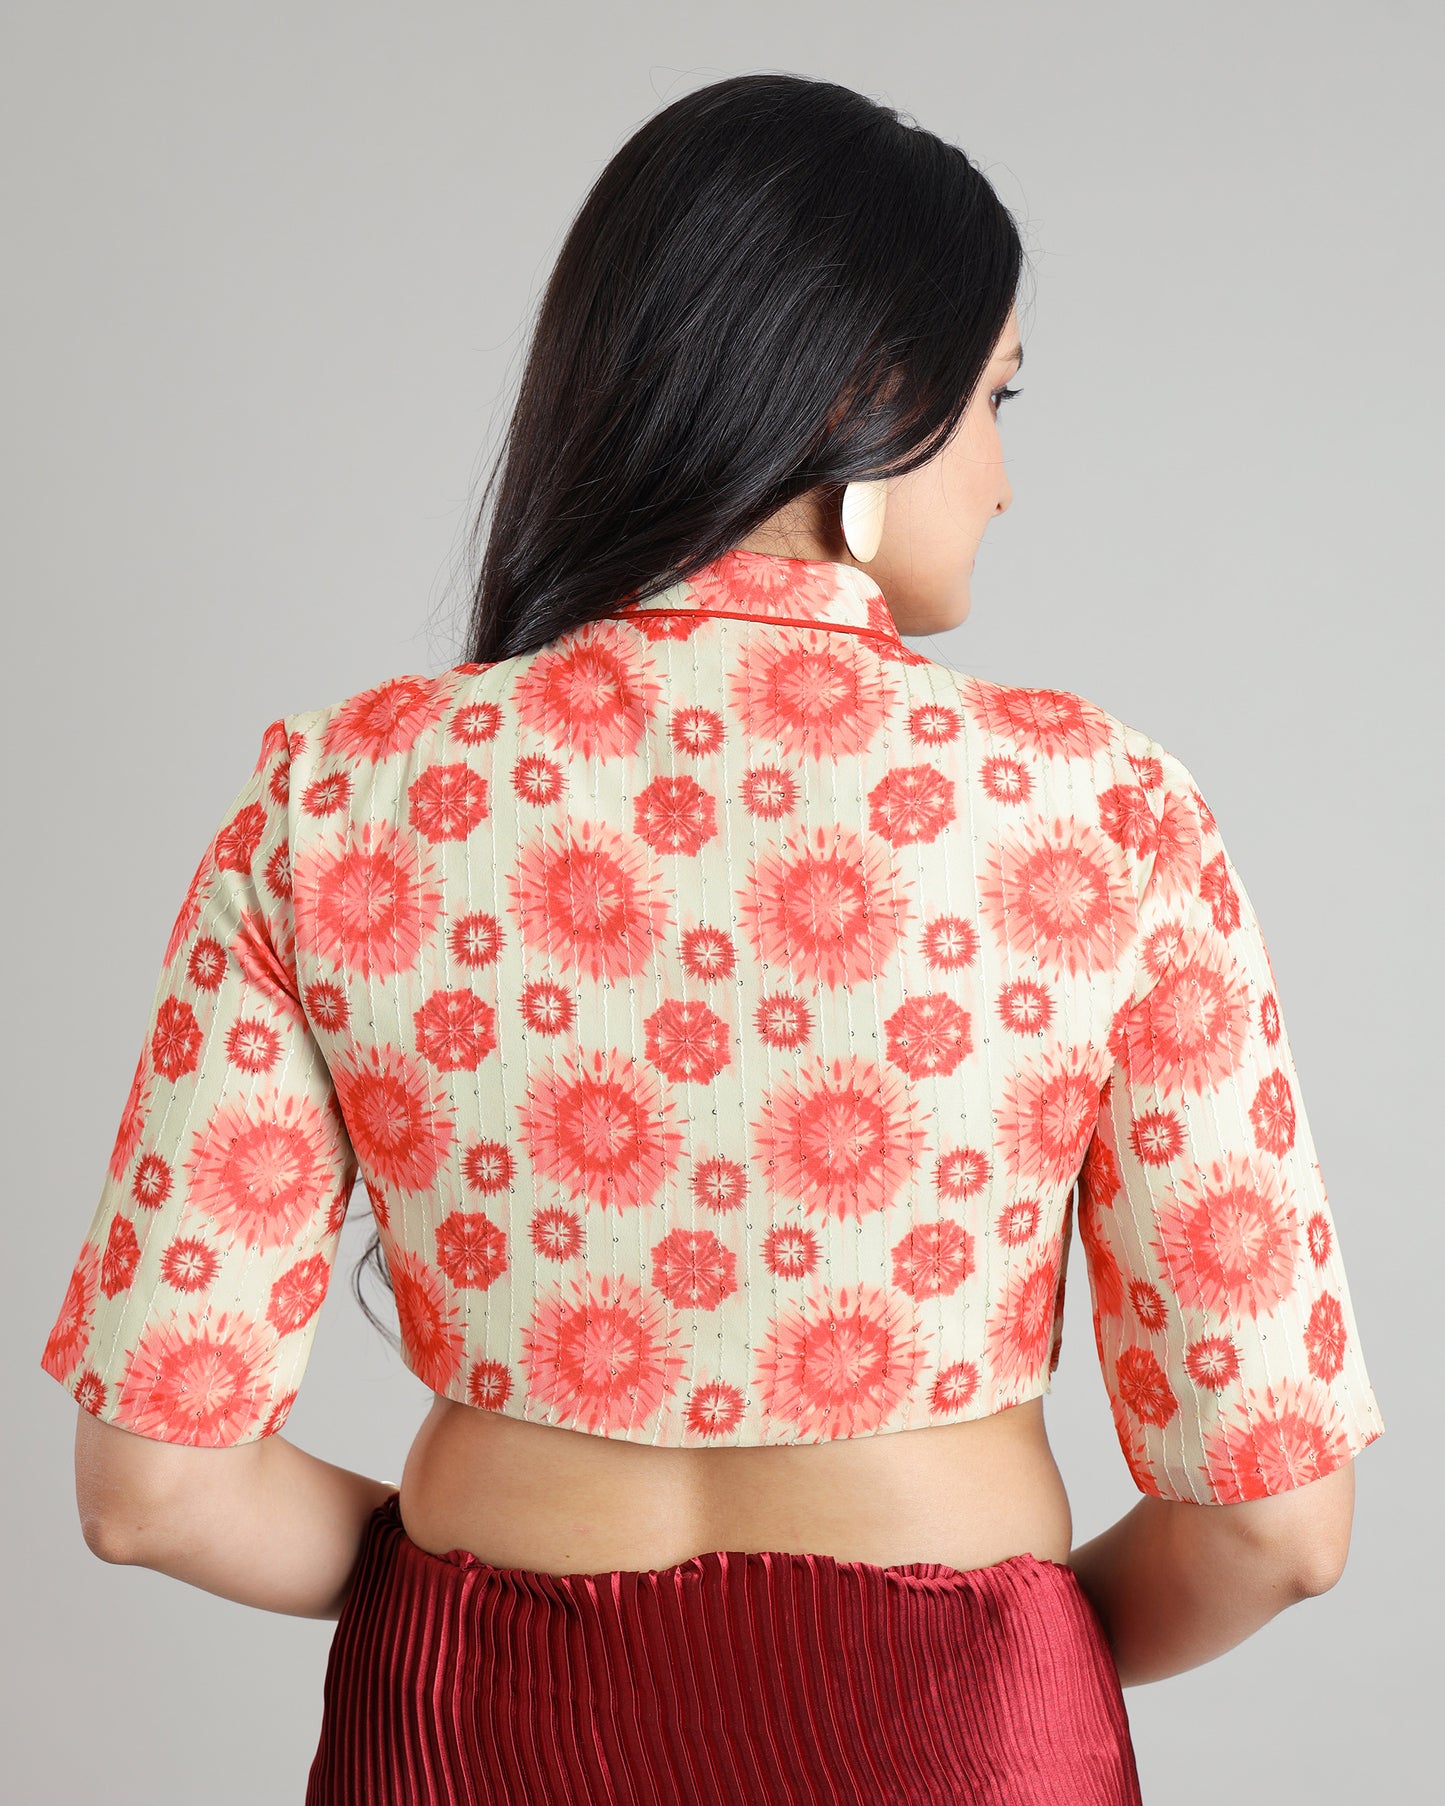 Own Your Style: Embroidered Floral Blouse